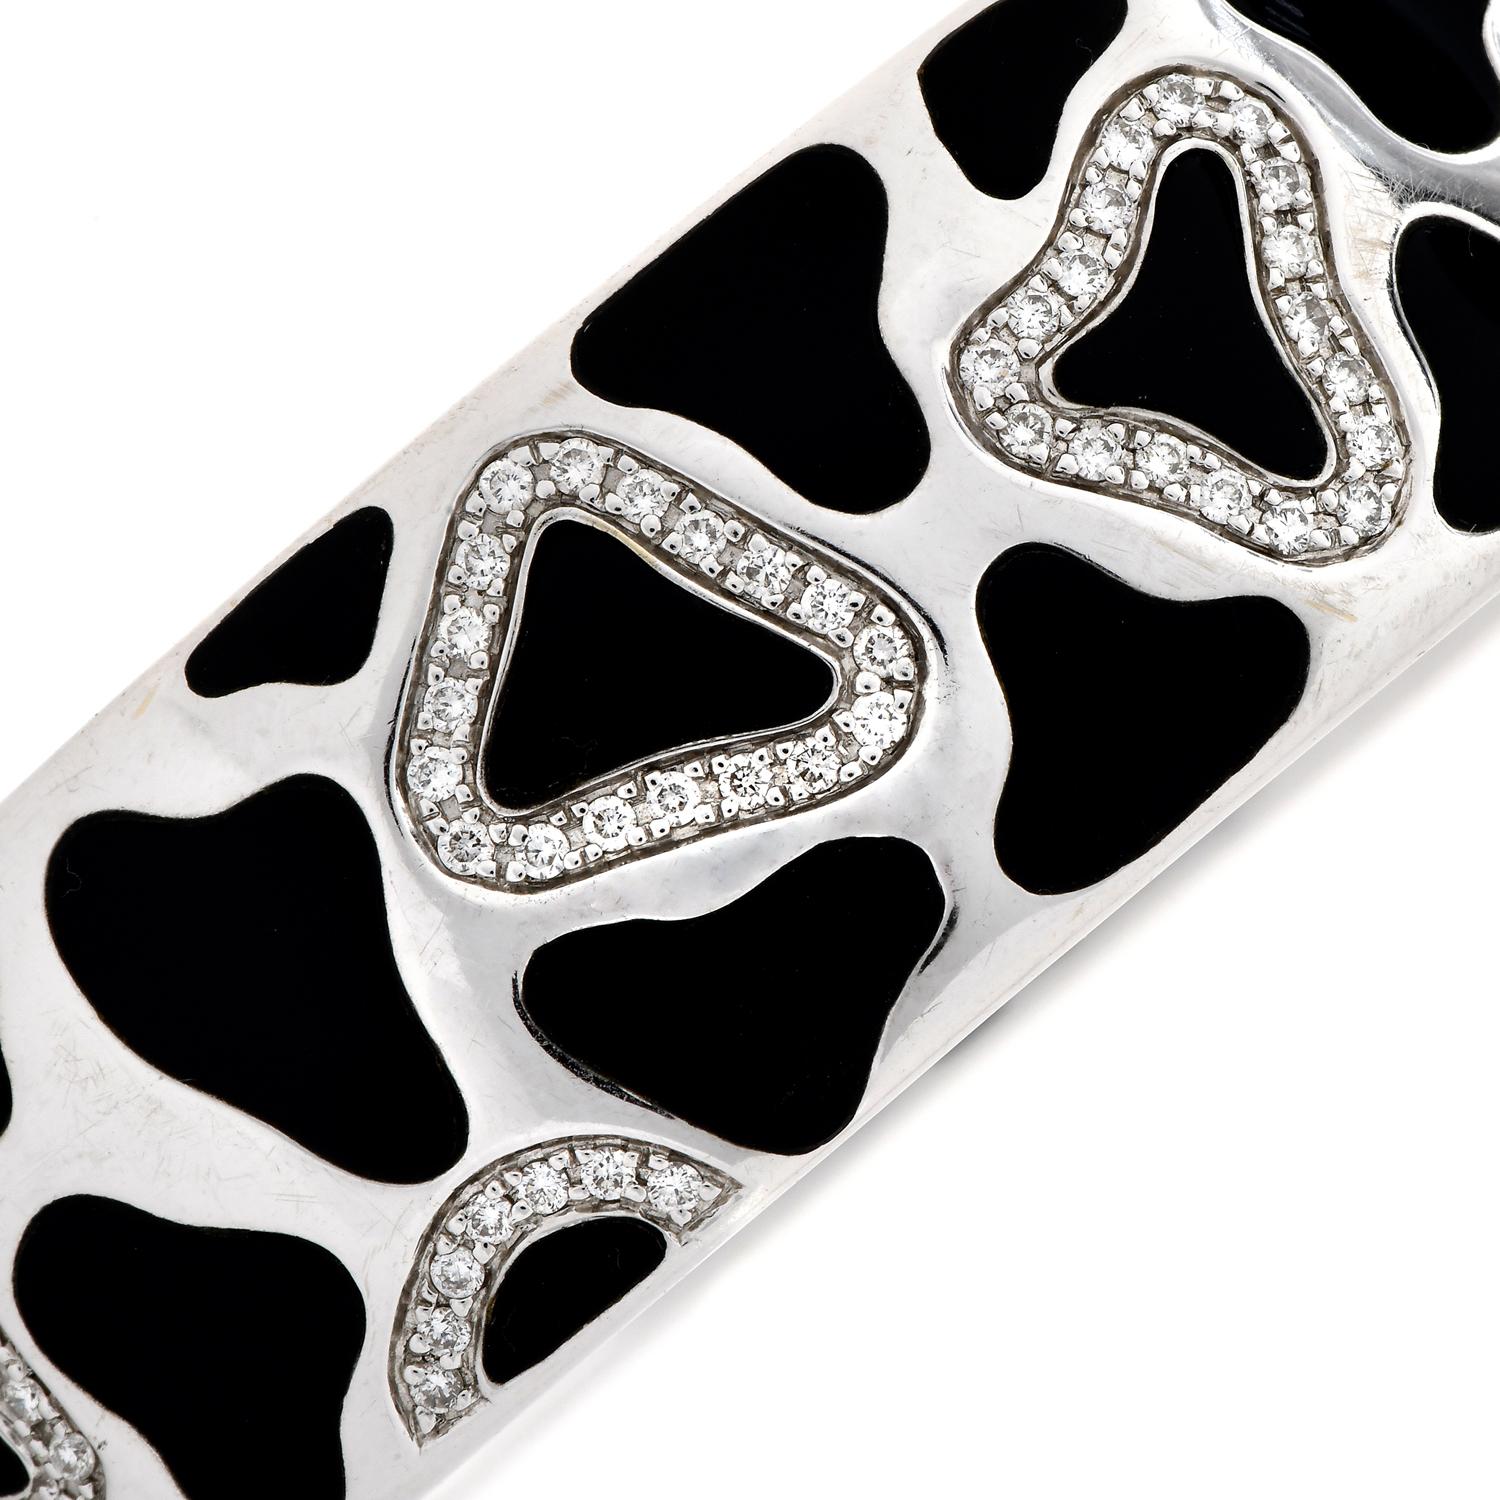 Panda collection Roberto Coin Diamond Onyx Gold Eternity Bracelet. A classic Diamond & Black Onyx Bracelet, from the Designer Roberto Coin.

An eternity-style slim medium bracelet, crafted in solid 18K White Gold with an Inlay of Black Onyx of